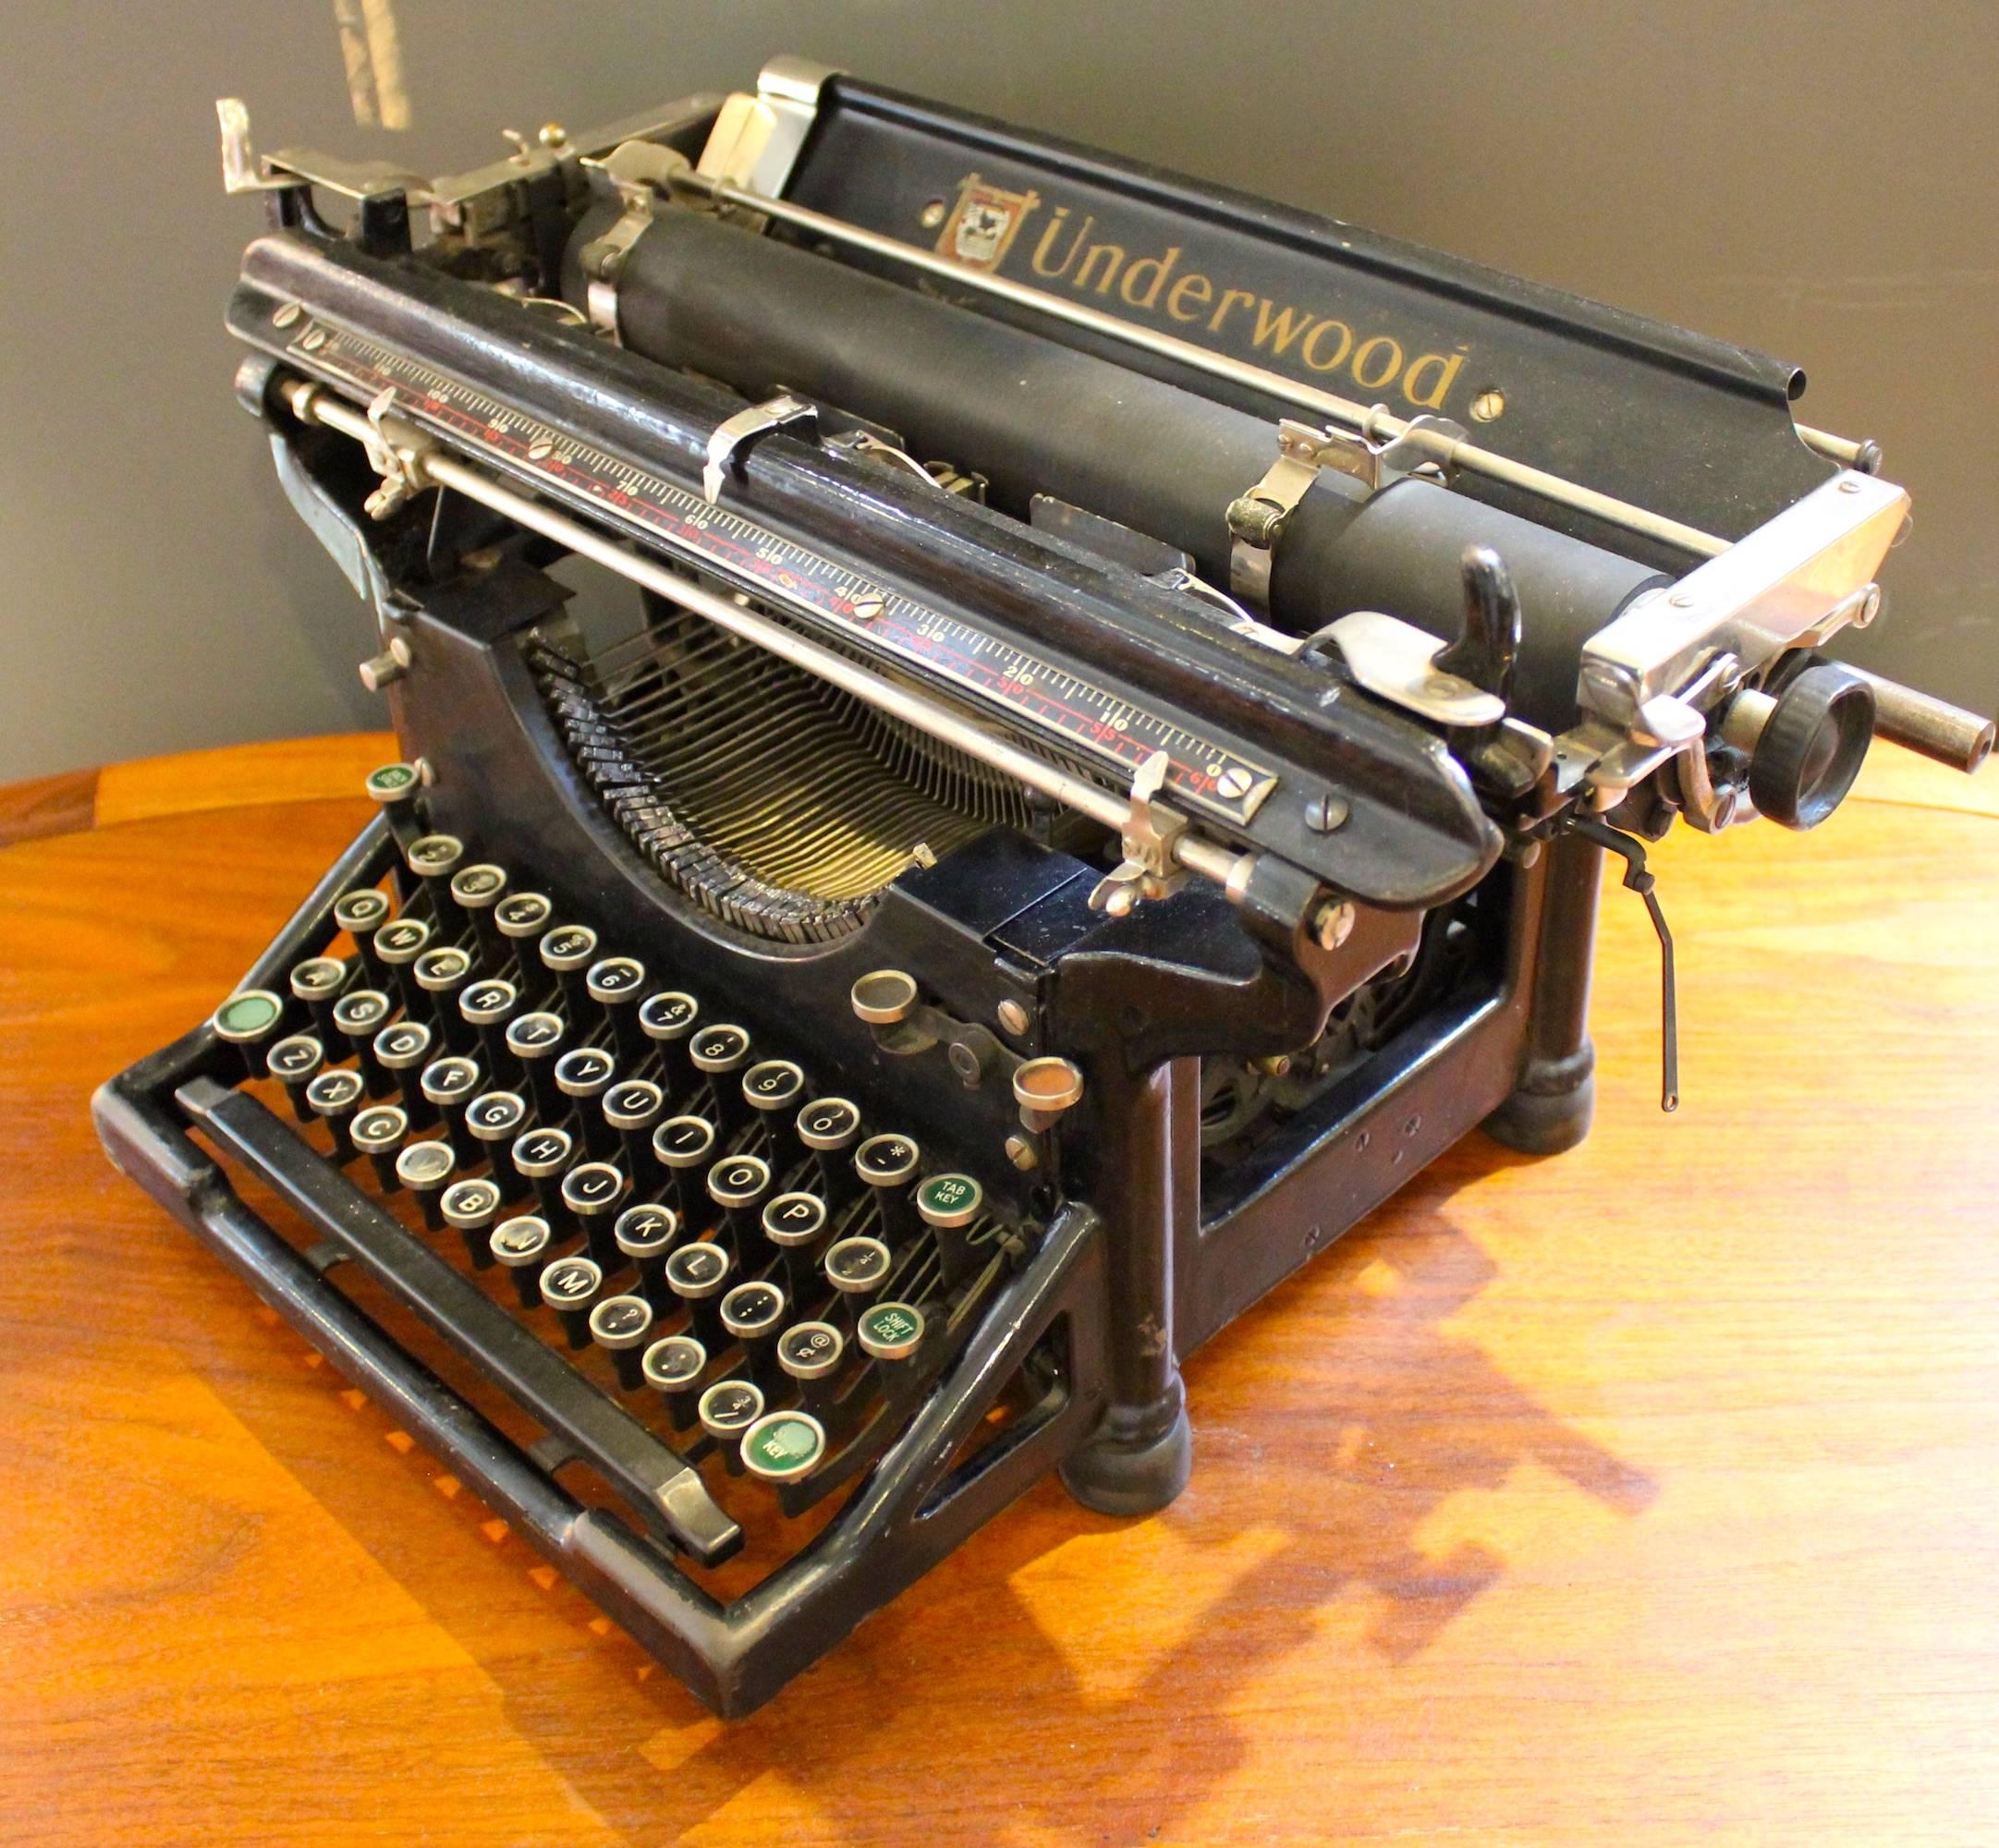 Vintage early 20th century Underwood typewriter. In excellent vintage condition, with all keys and arms in good working order. No ribbon.